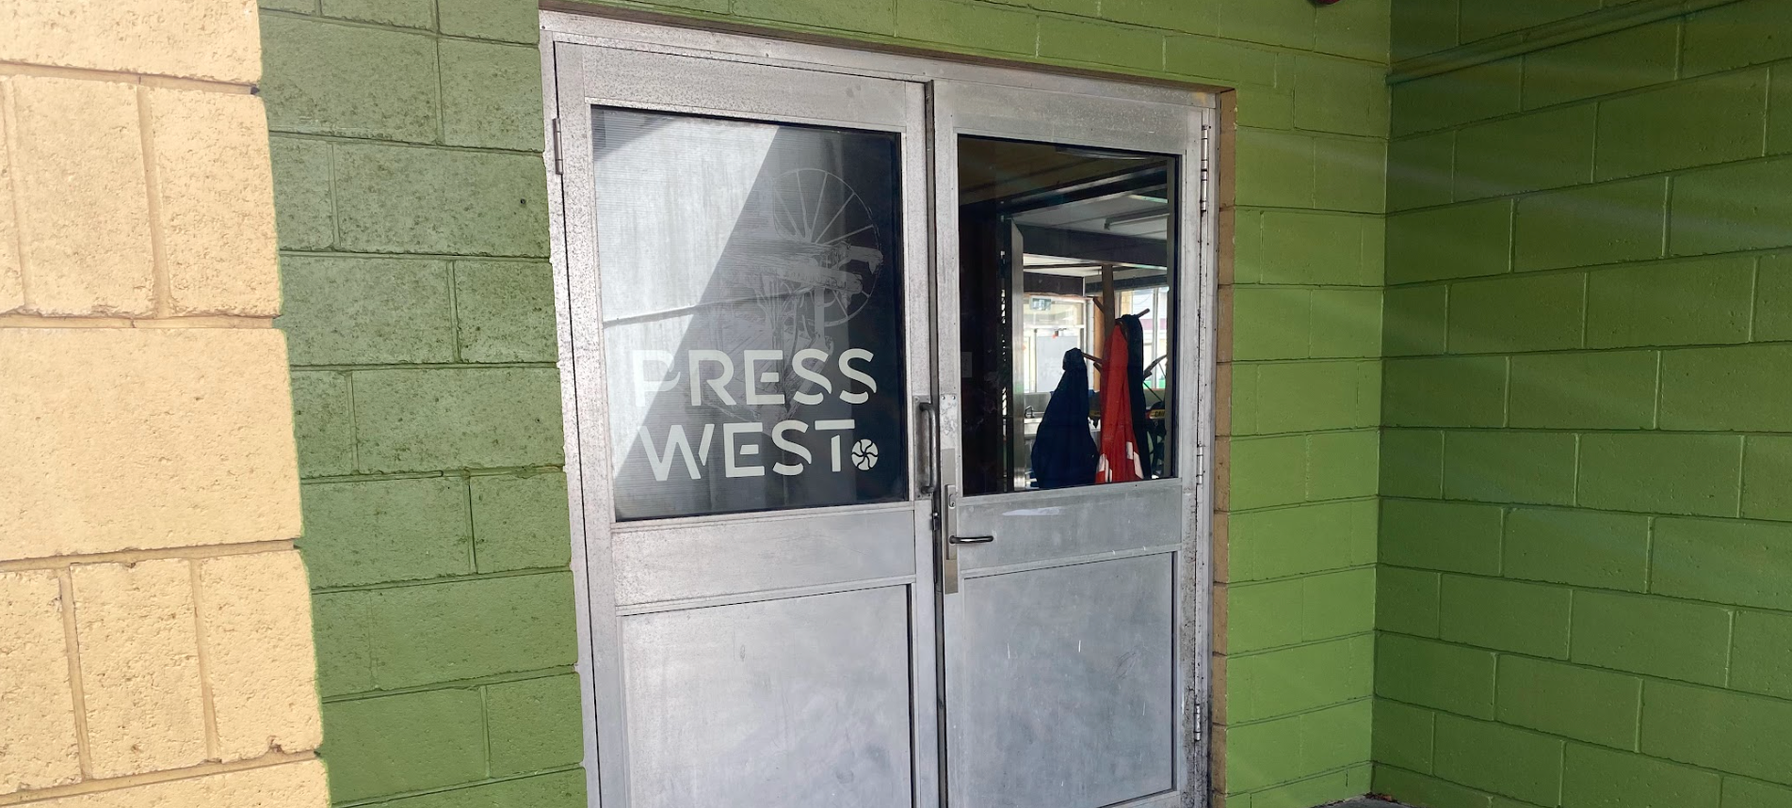 The entryway to PressWEST